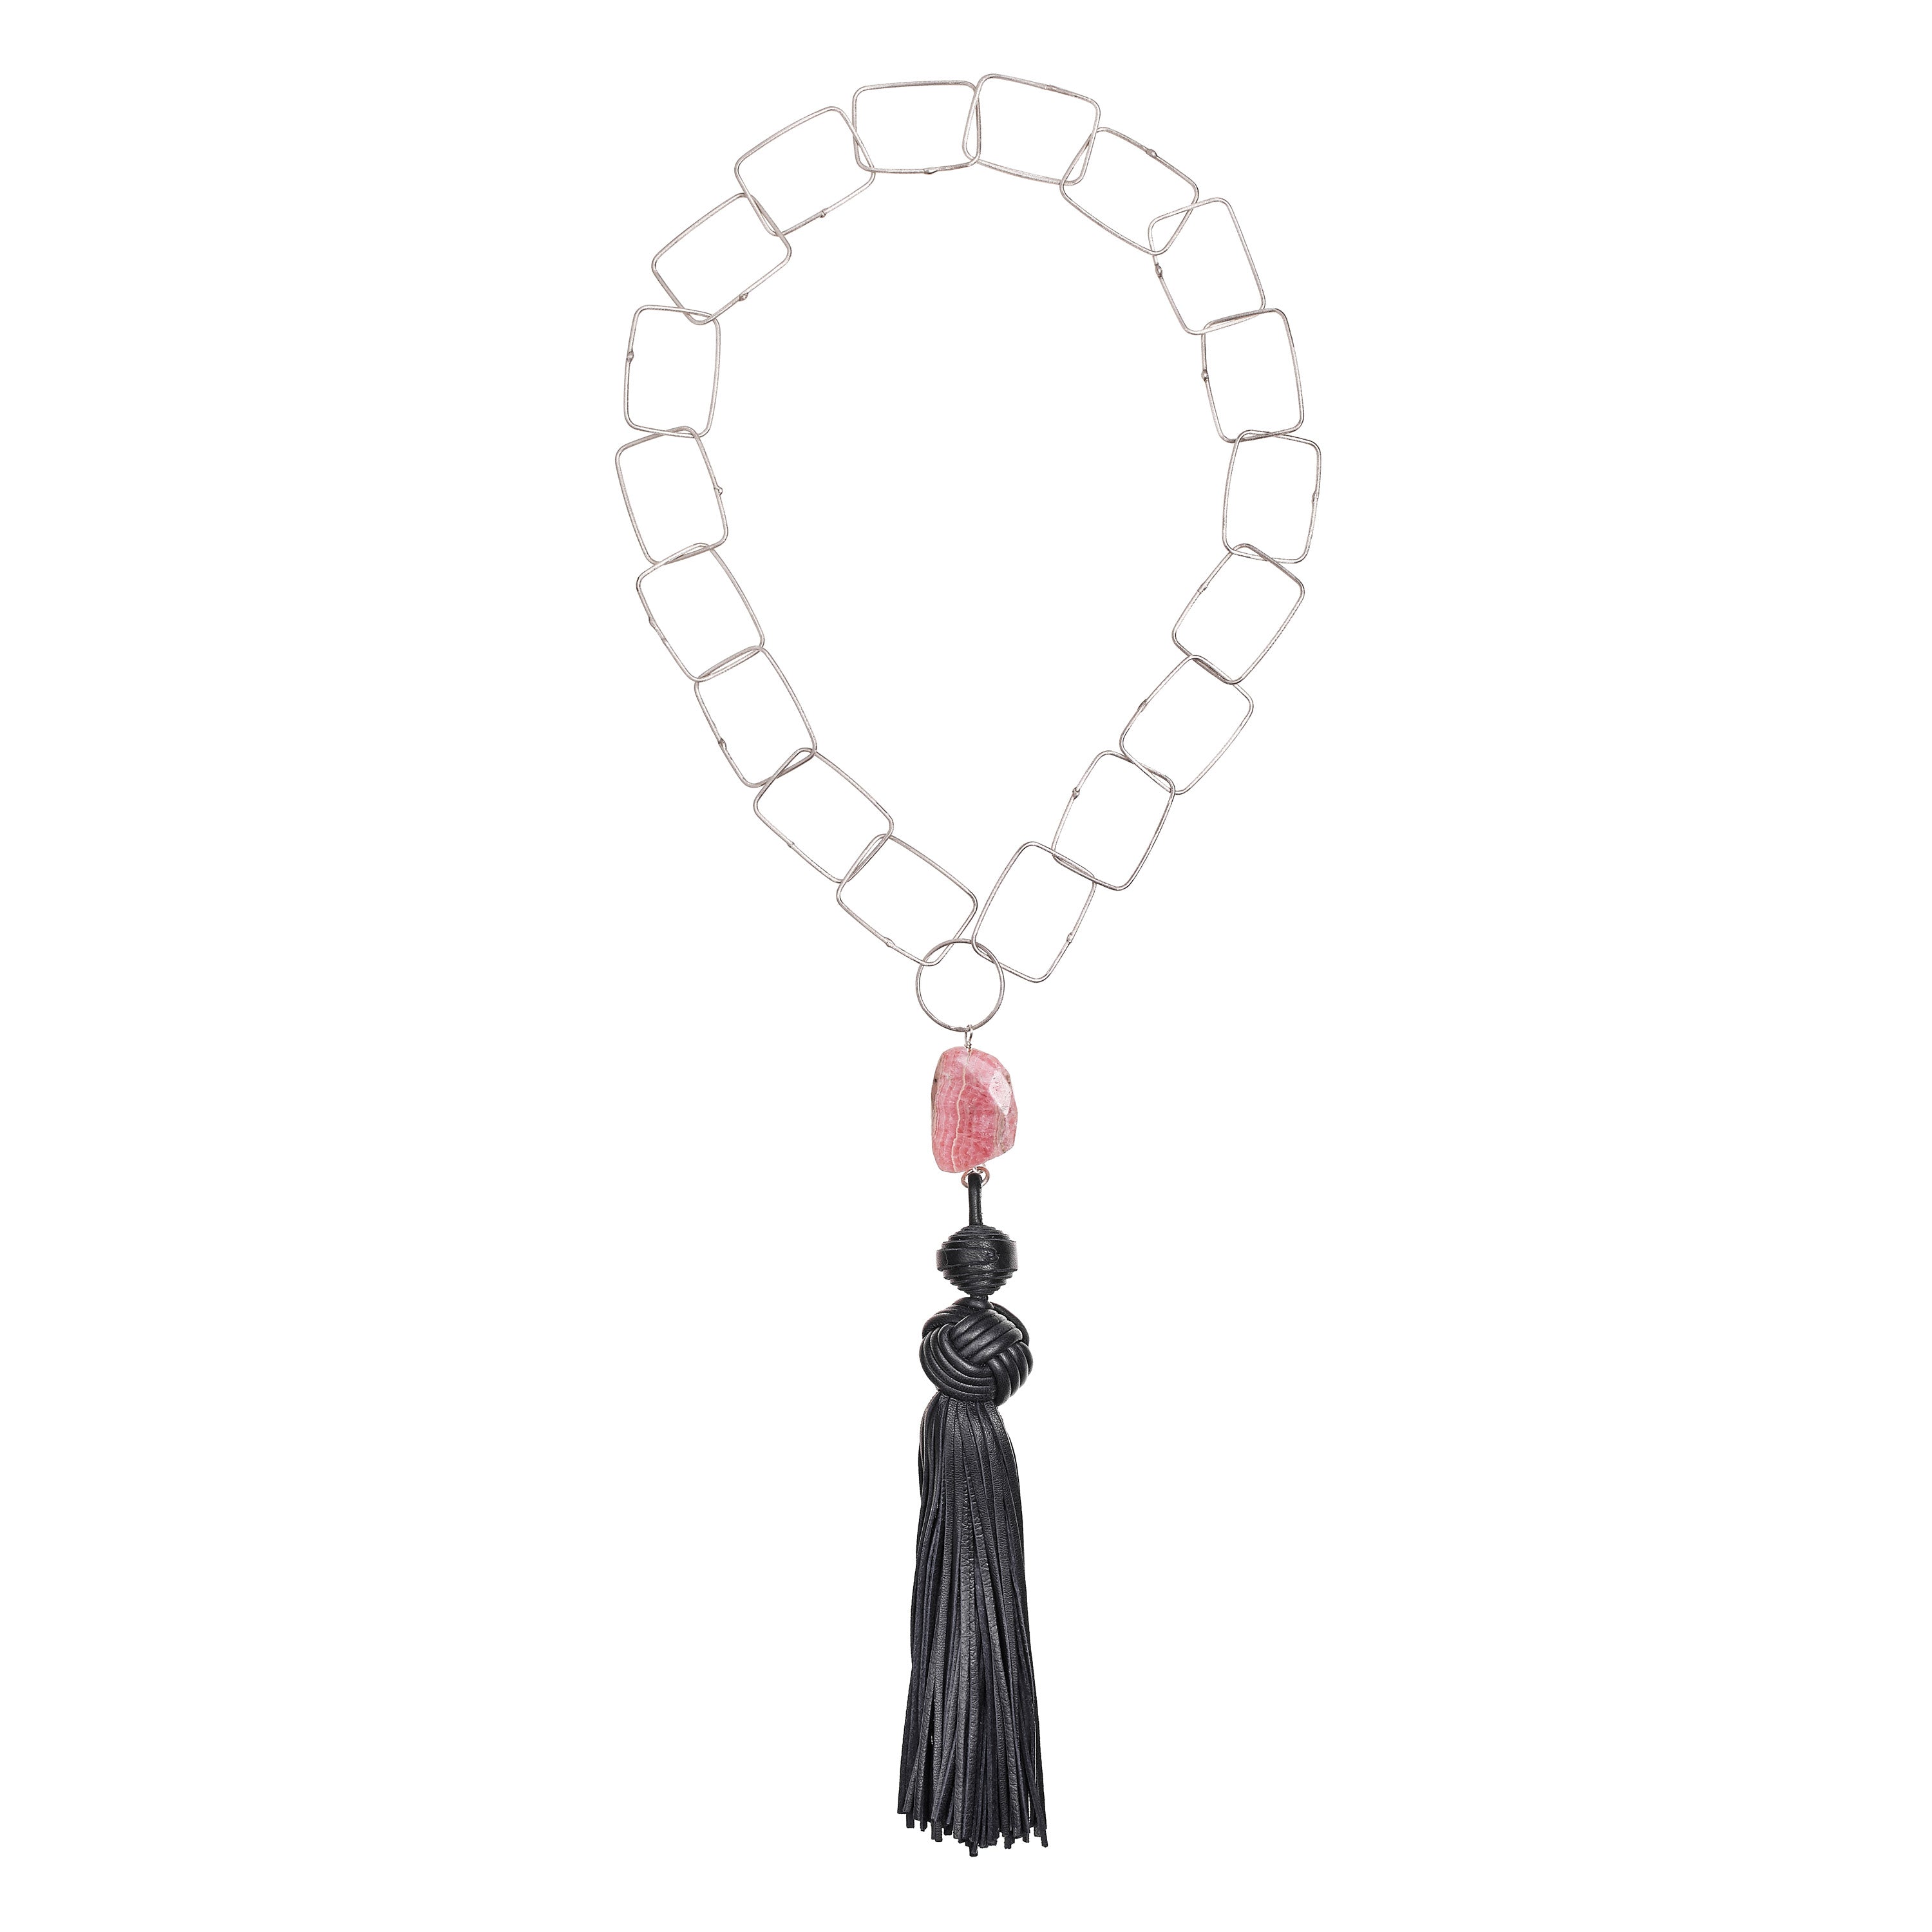 Tassel “Horse” Necklace with Deep Blue Leather and Rhodochrosite